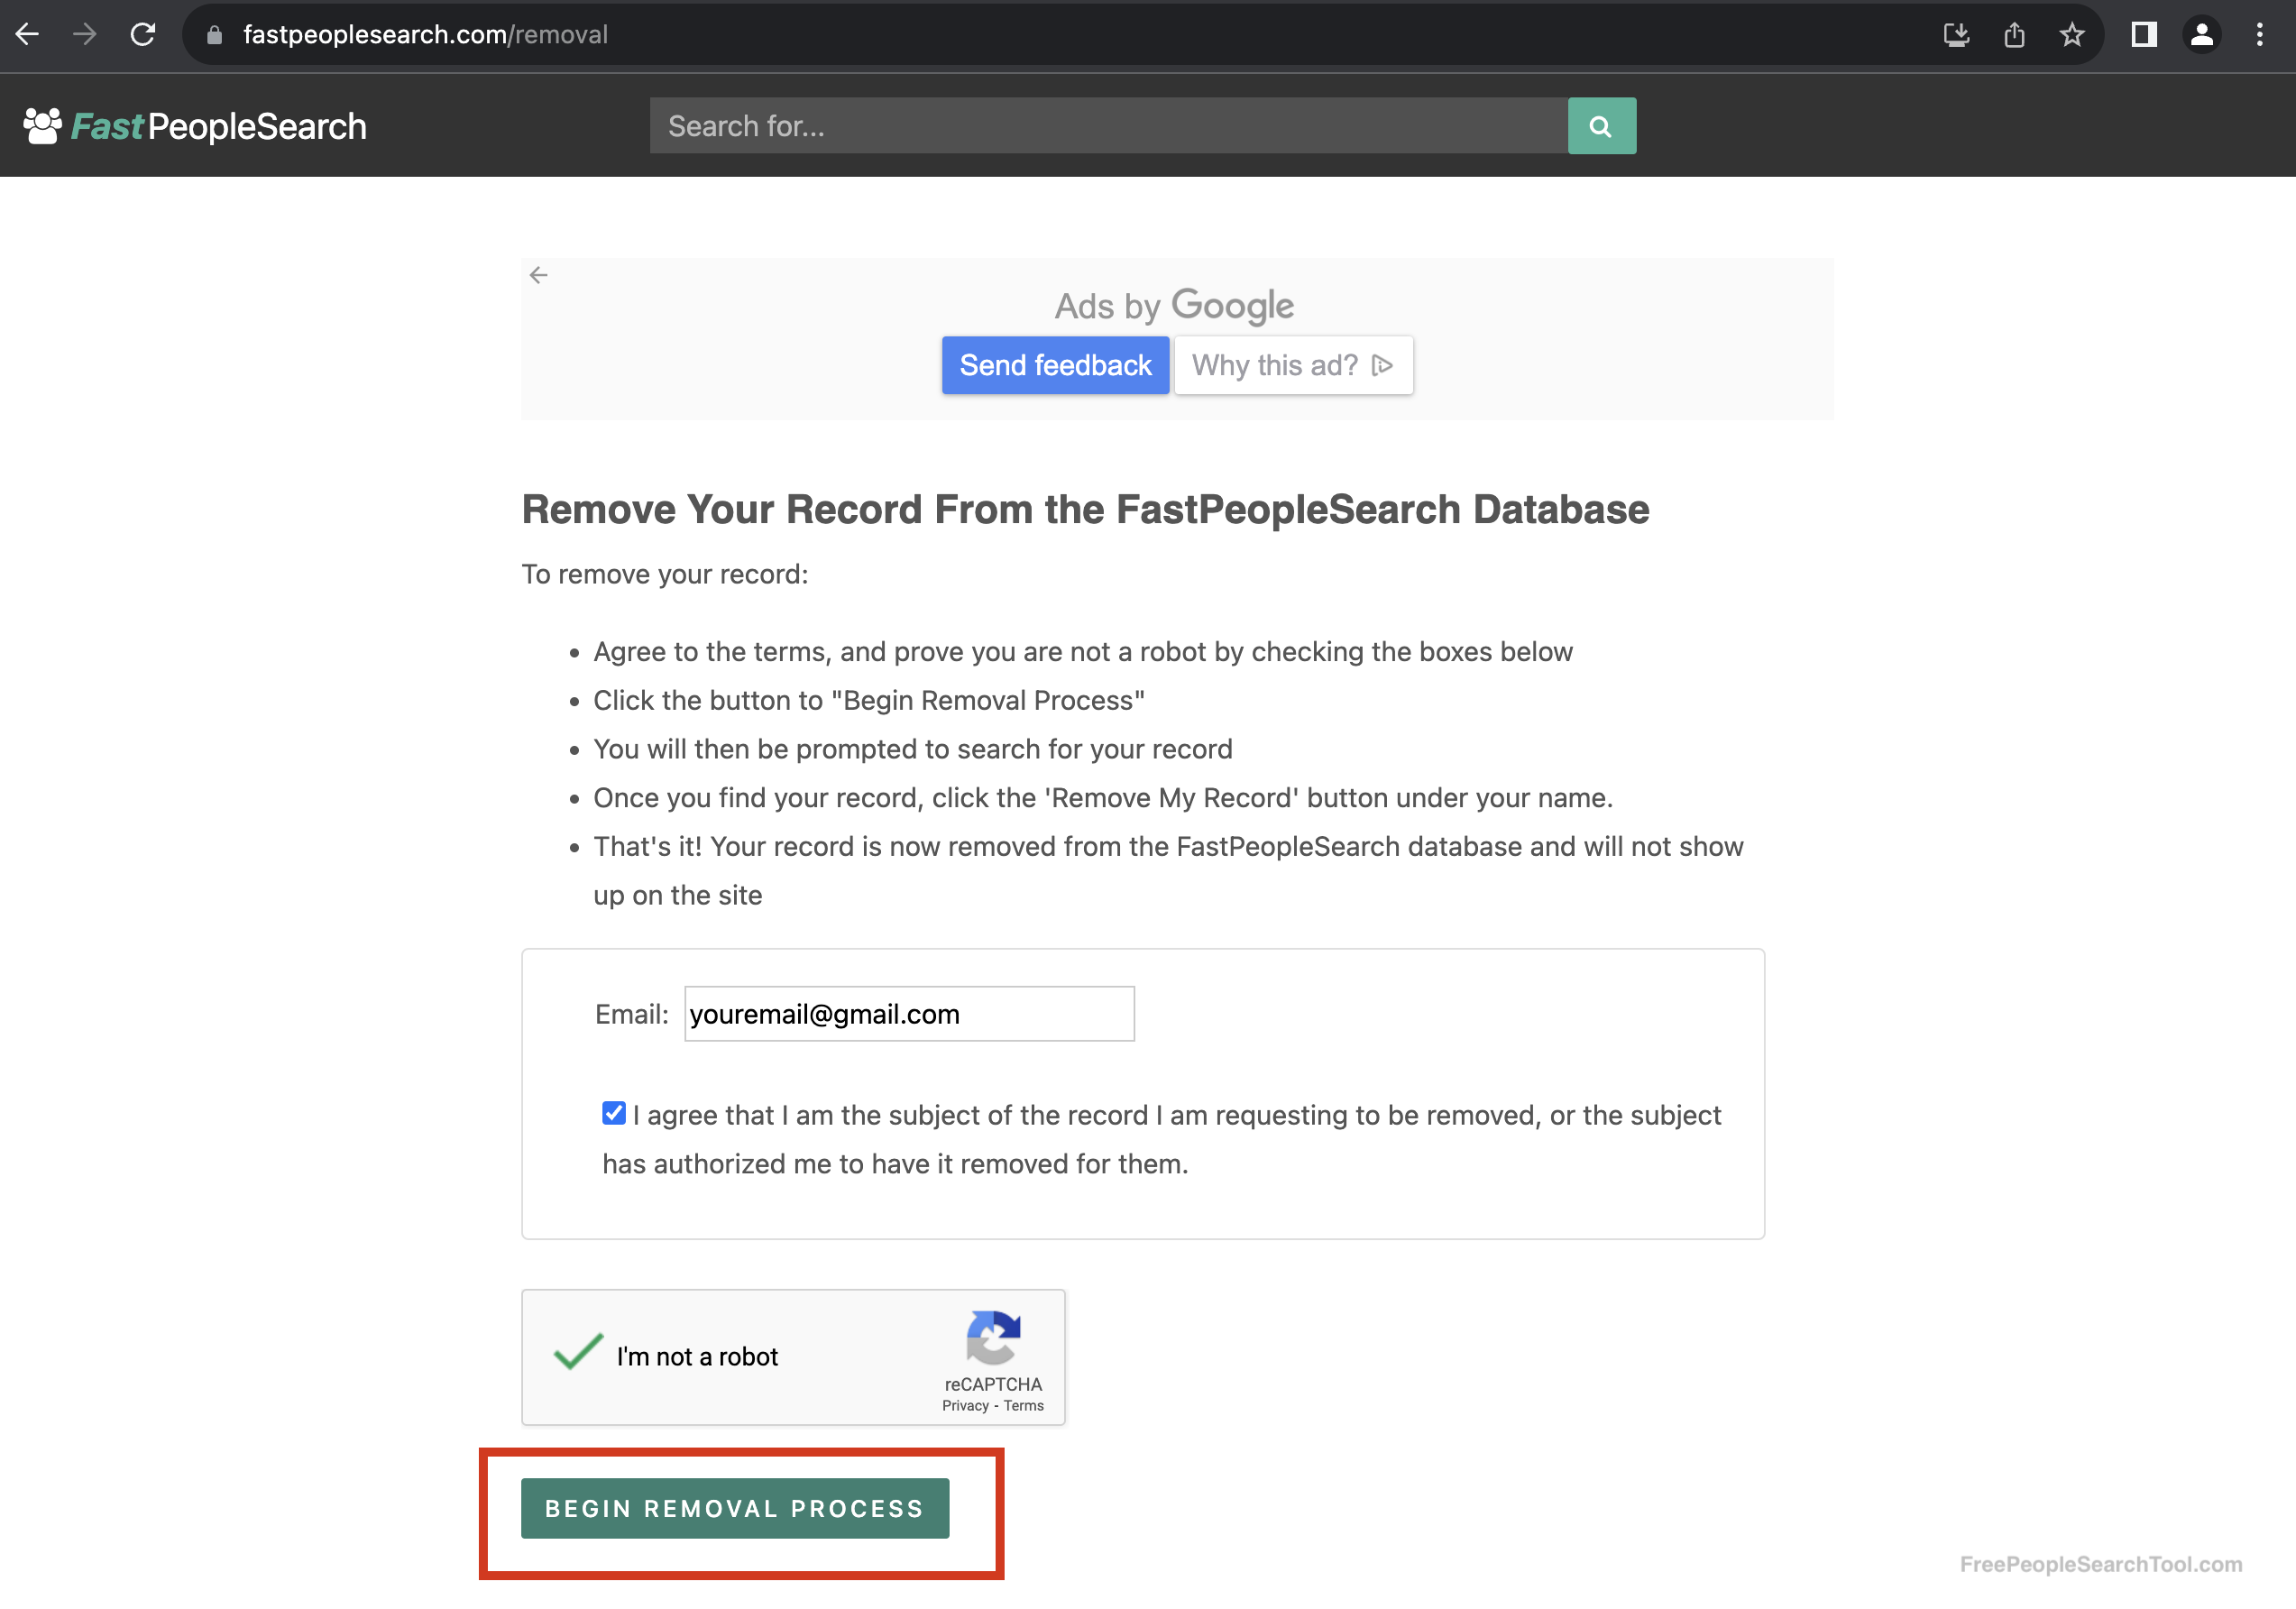 fastpeoplesearch opt out page filled out